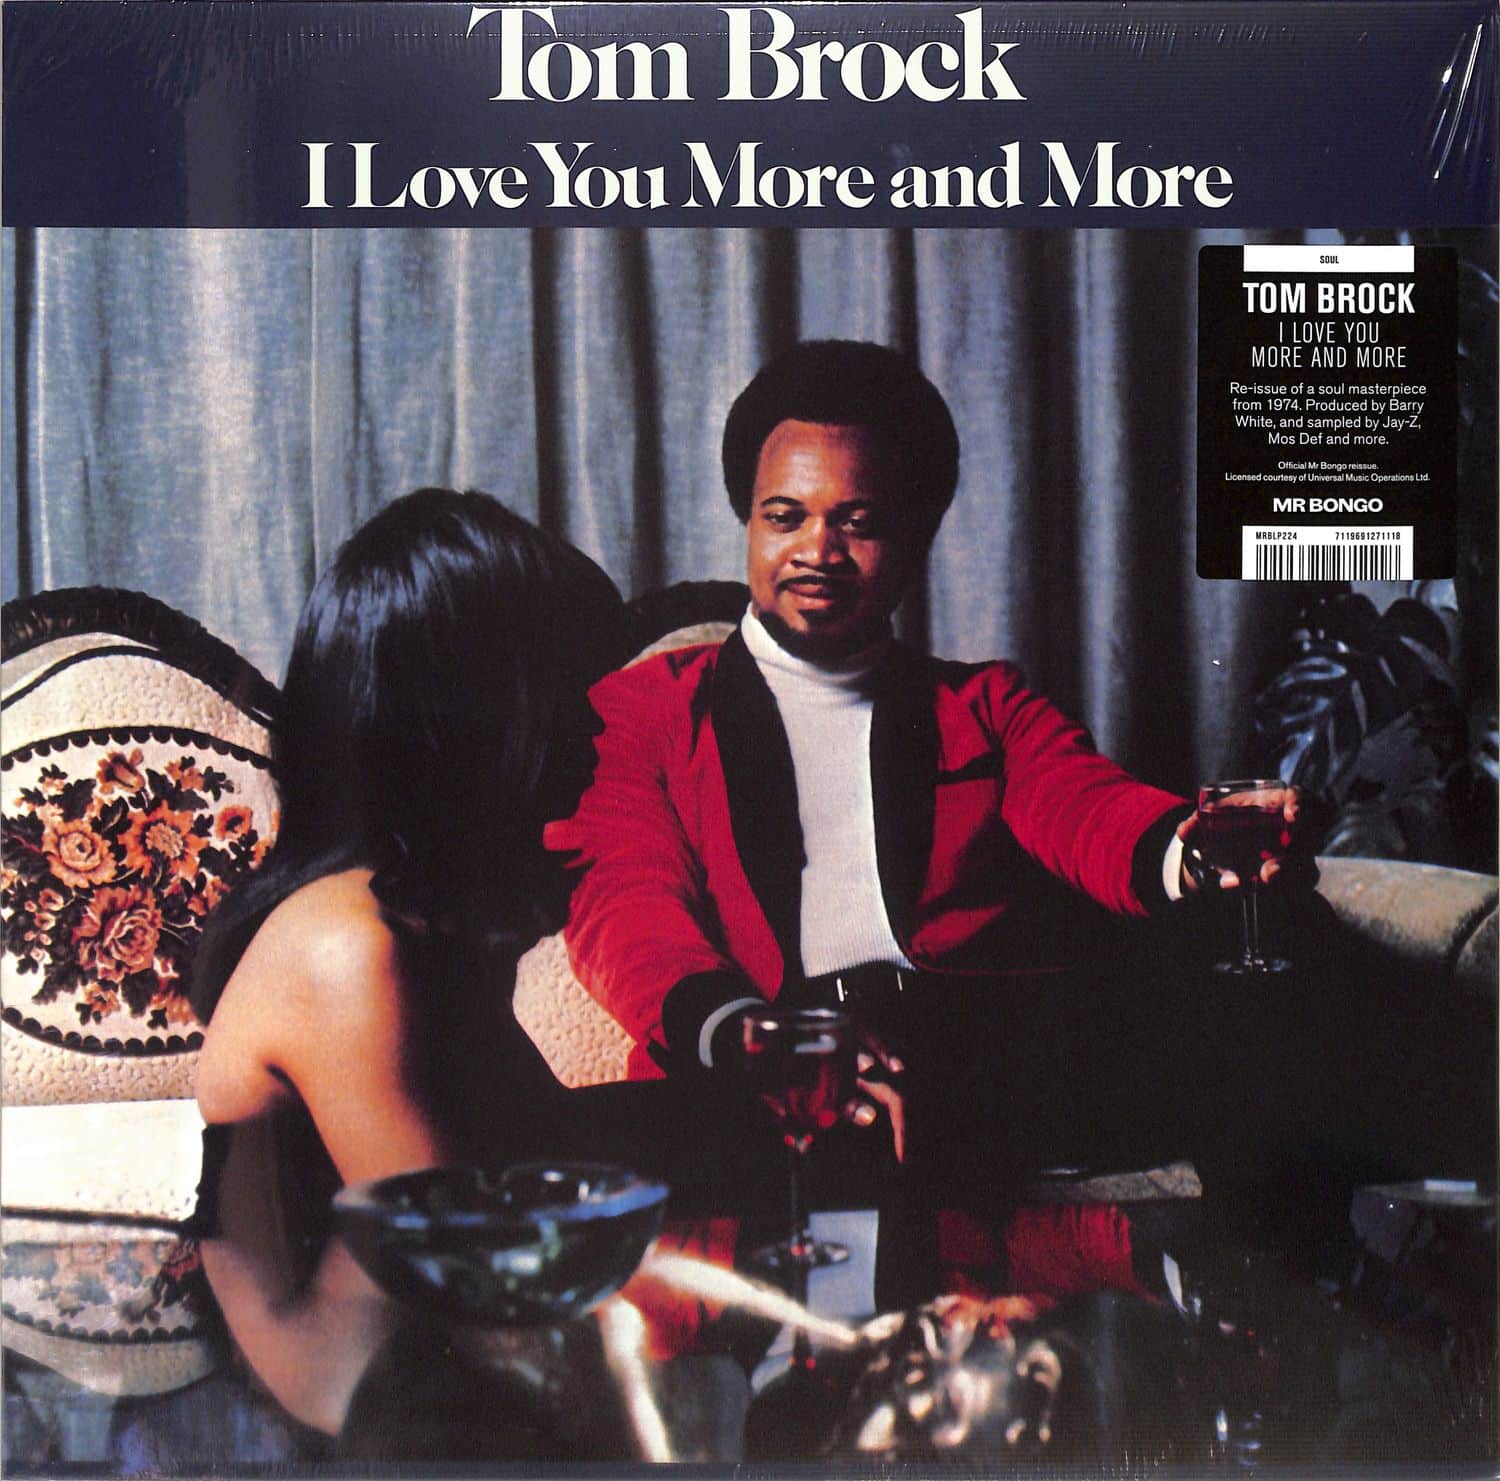 Tom Brock - I LOVE YOU MORE AND MORE 